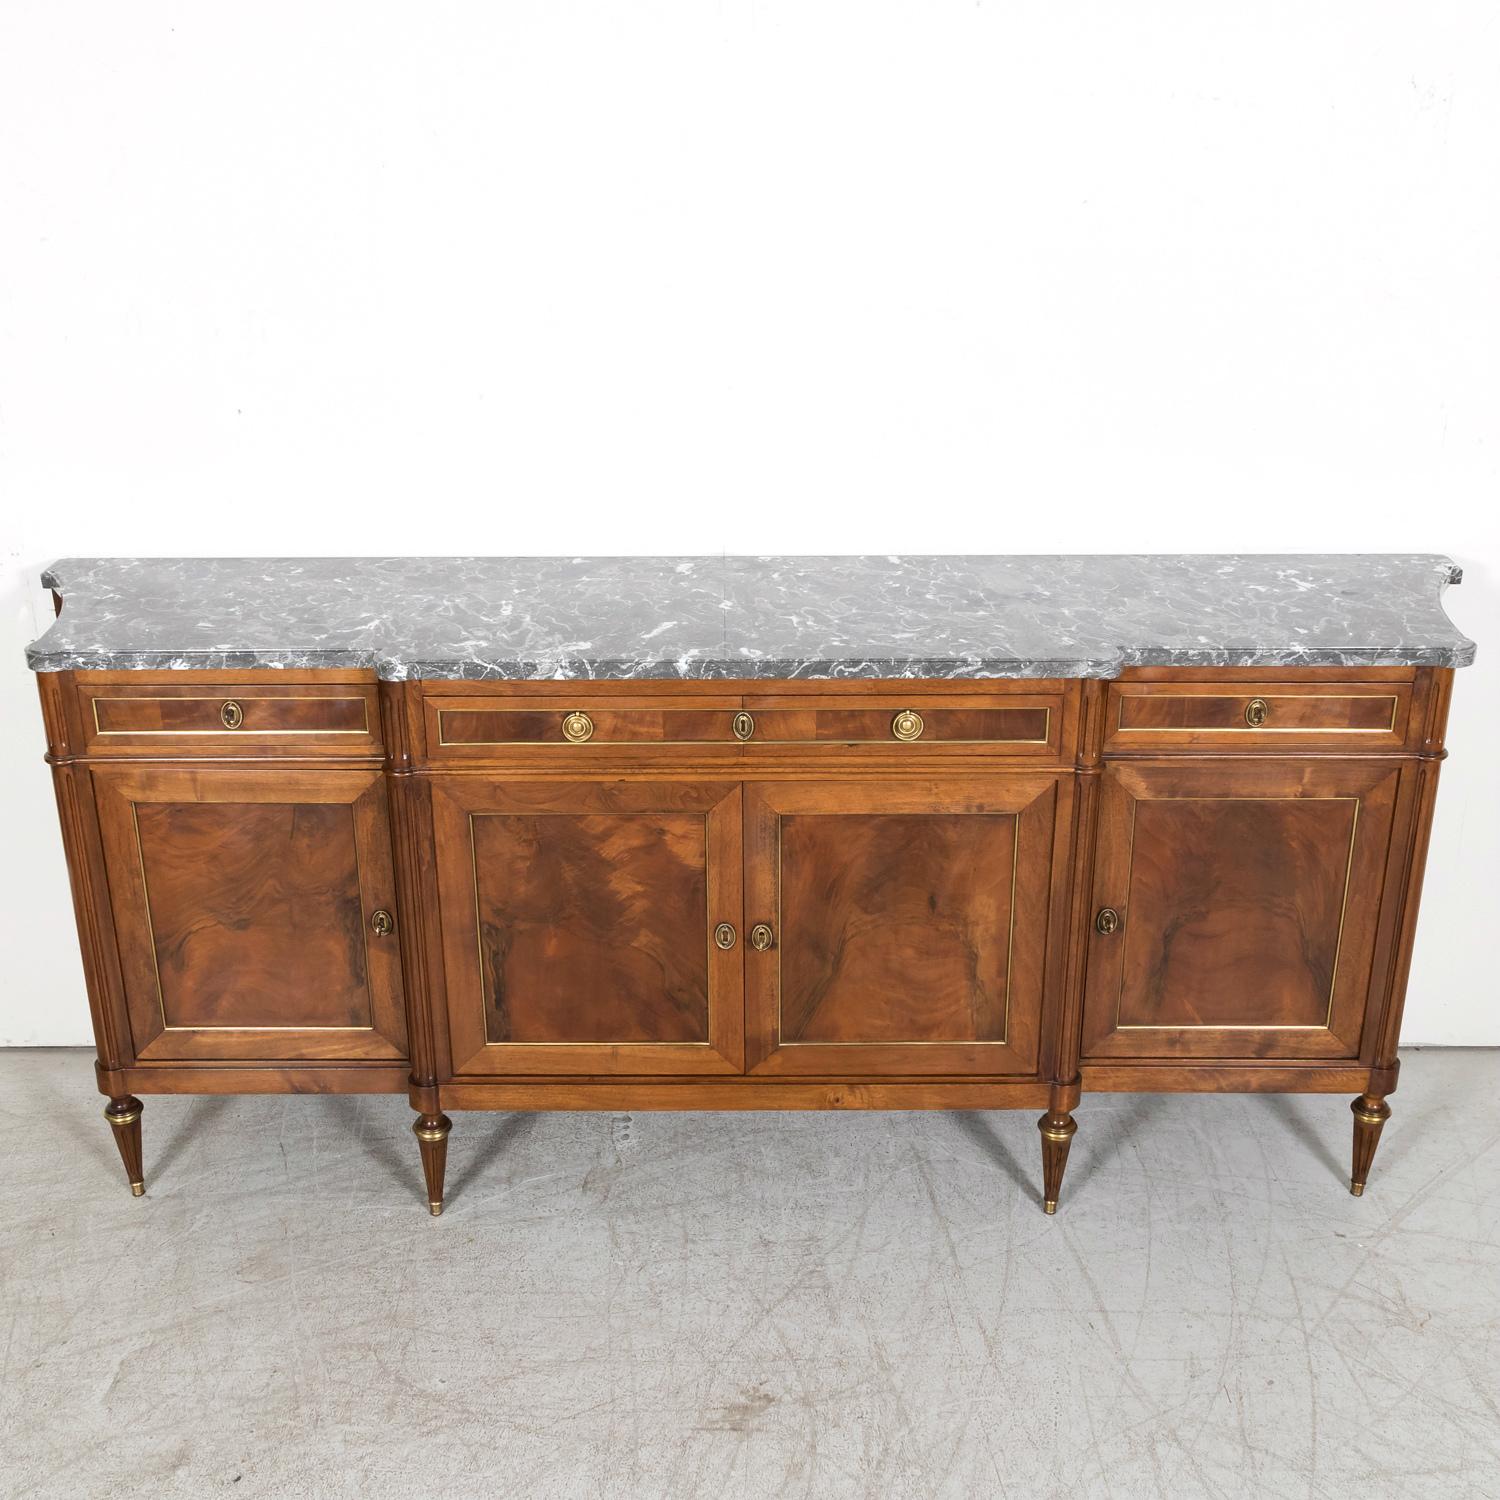 An exquisite antique French Louis XVI style enfilade buffet, handcrafted in Paris of walnut, circa 1920s, that embodies the timeless appeal and meticulous craftsmanship synonymous with Parisian ateliers and epitomizes the elegance and sophistication